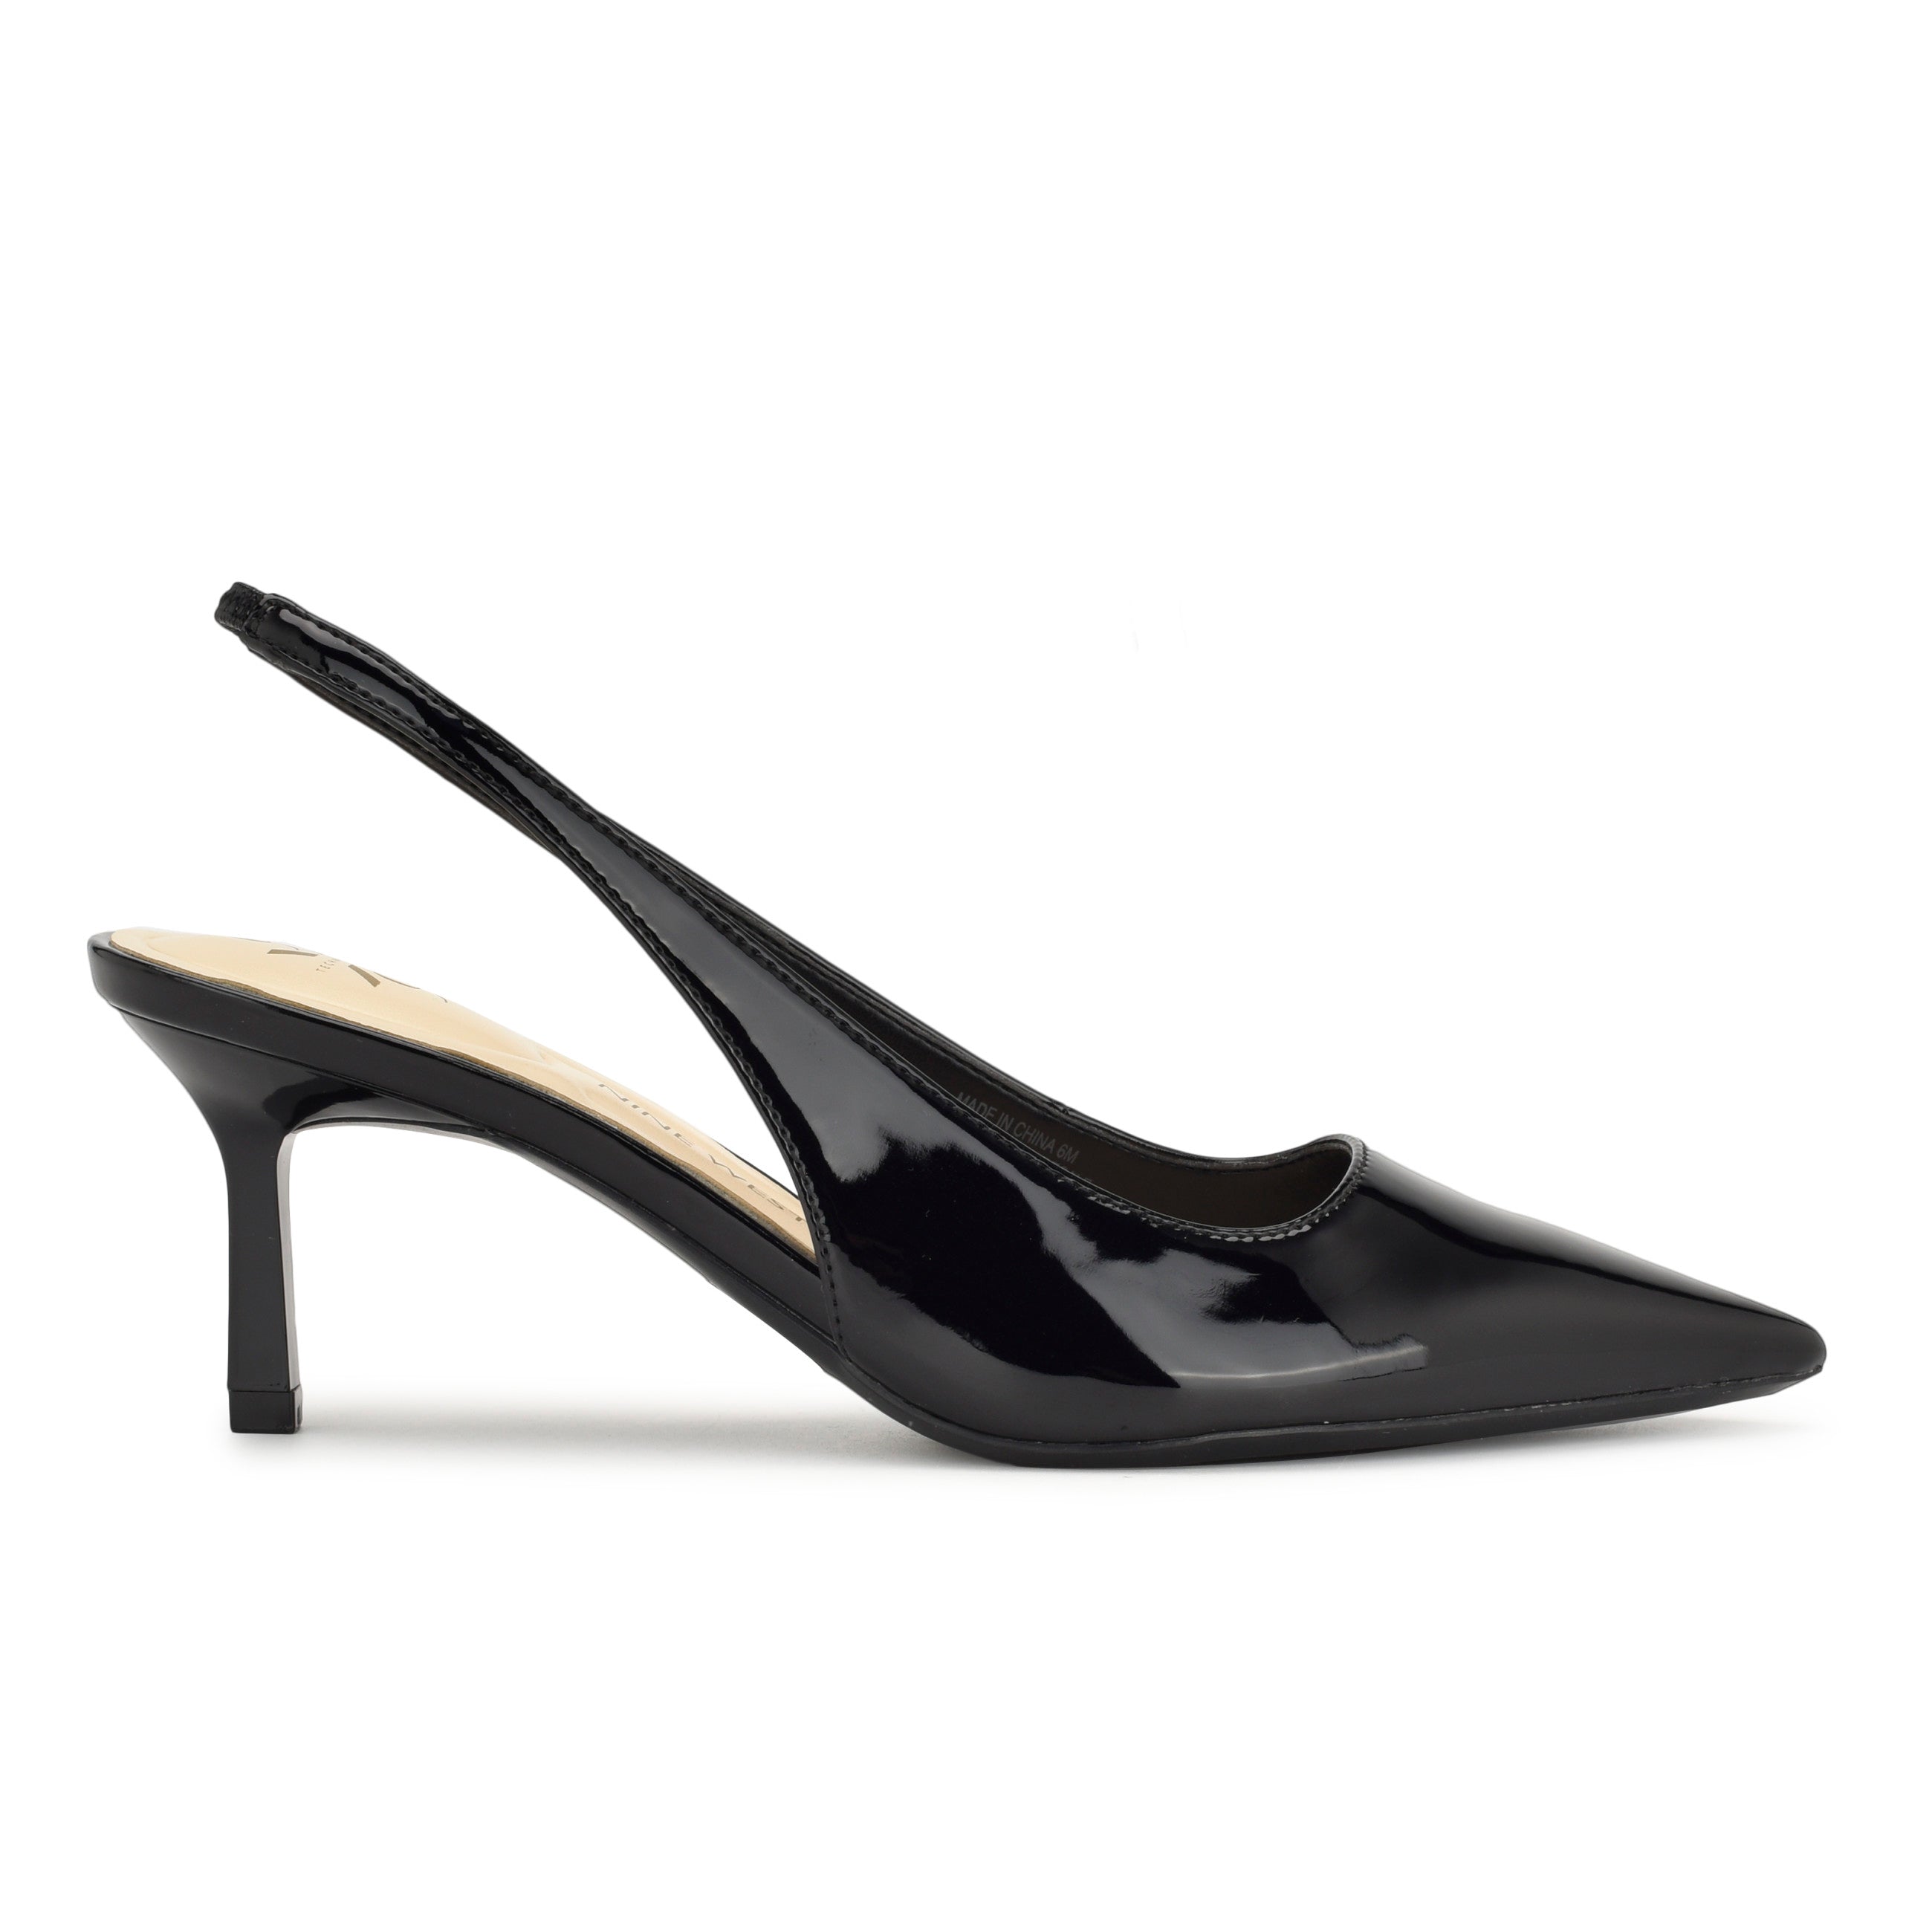 Steviee Black and Beige Pointed-Toe Slingback Pumps | Slingback pump,  Slingback, Pumps heels